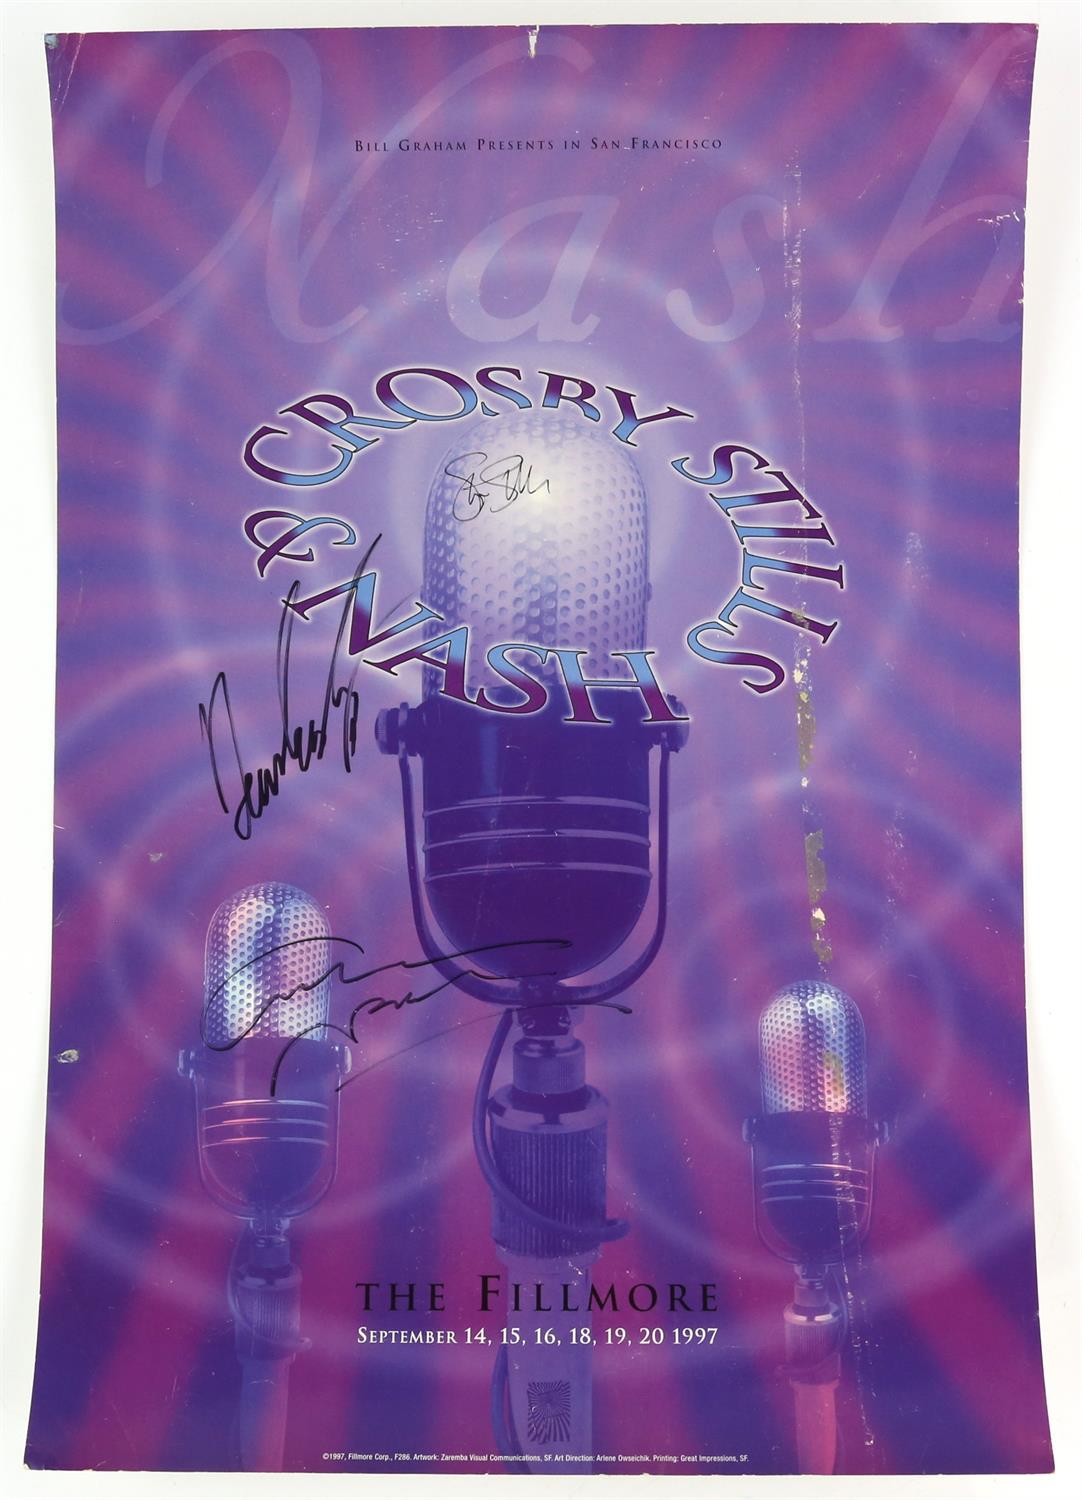 Crosby, Stills & Nash - two posters autographed by David Crosby, Stephen Stills and Graham Nash, - Image 2 of 2